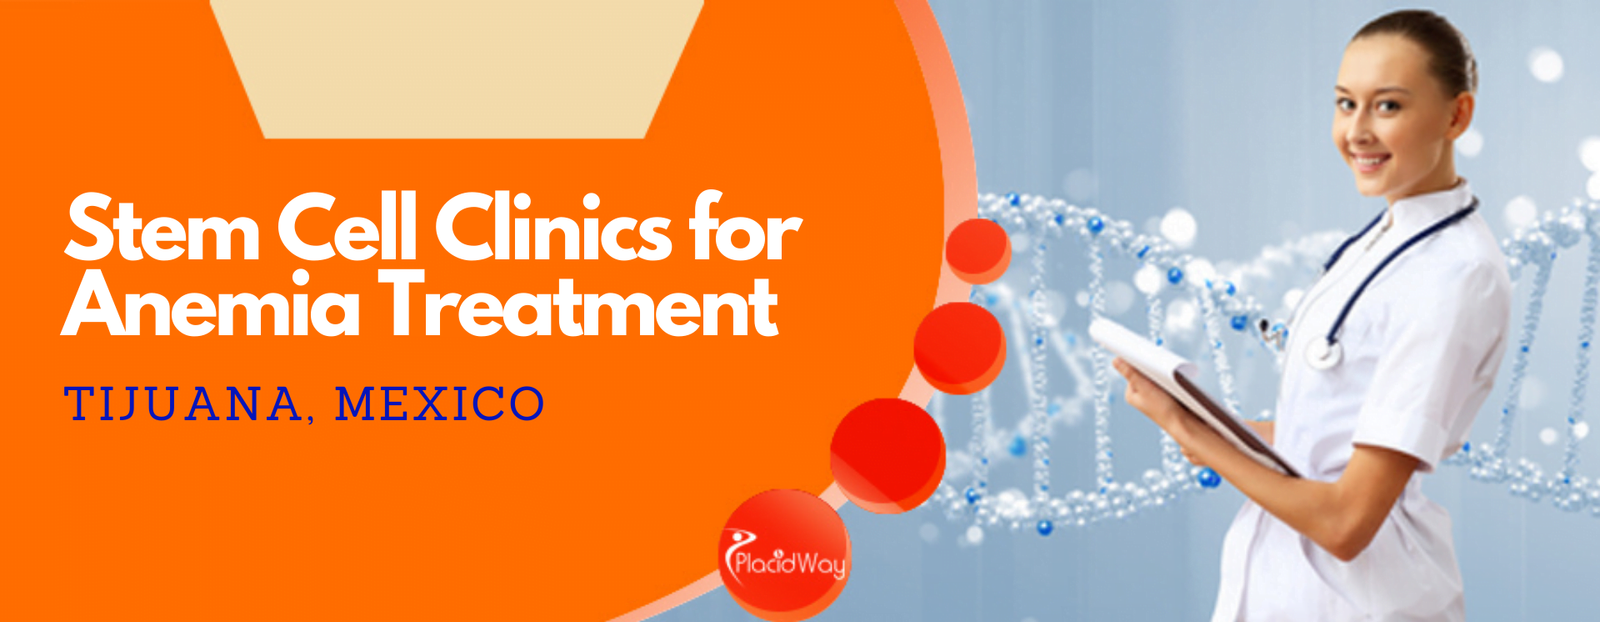 Stem Cell Clinics for Anemia Treatment in Tijuana, Mexico